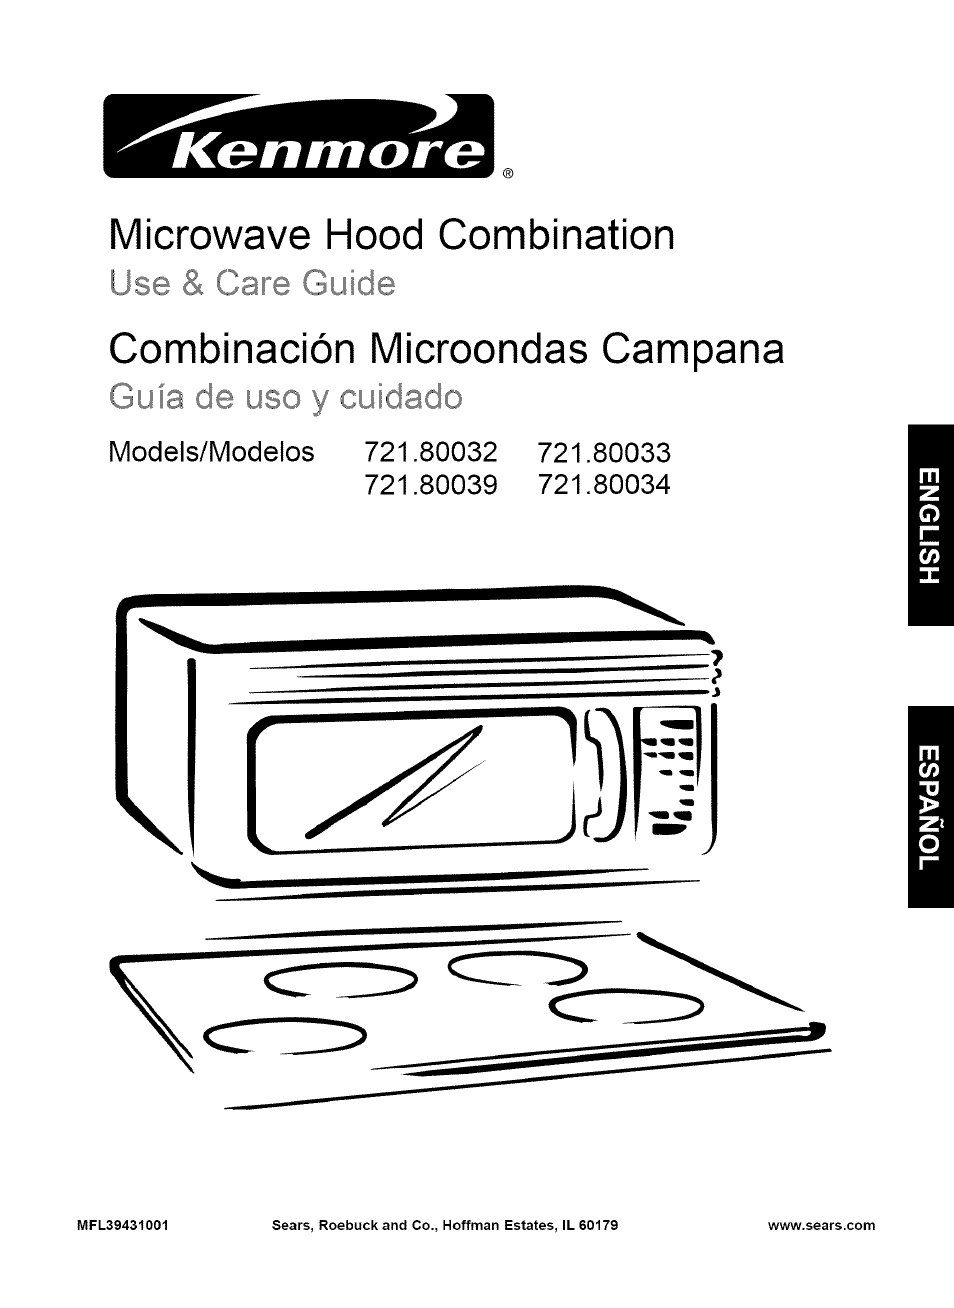 Kenmore MICROWAVE HOOD COMBINATION 721.80034 User Manual | 33 pages